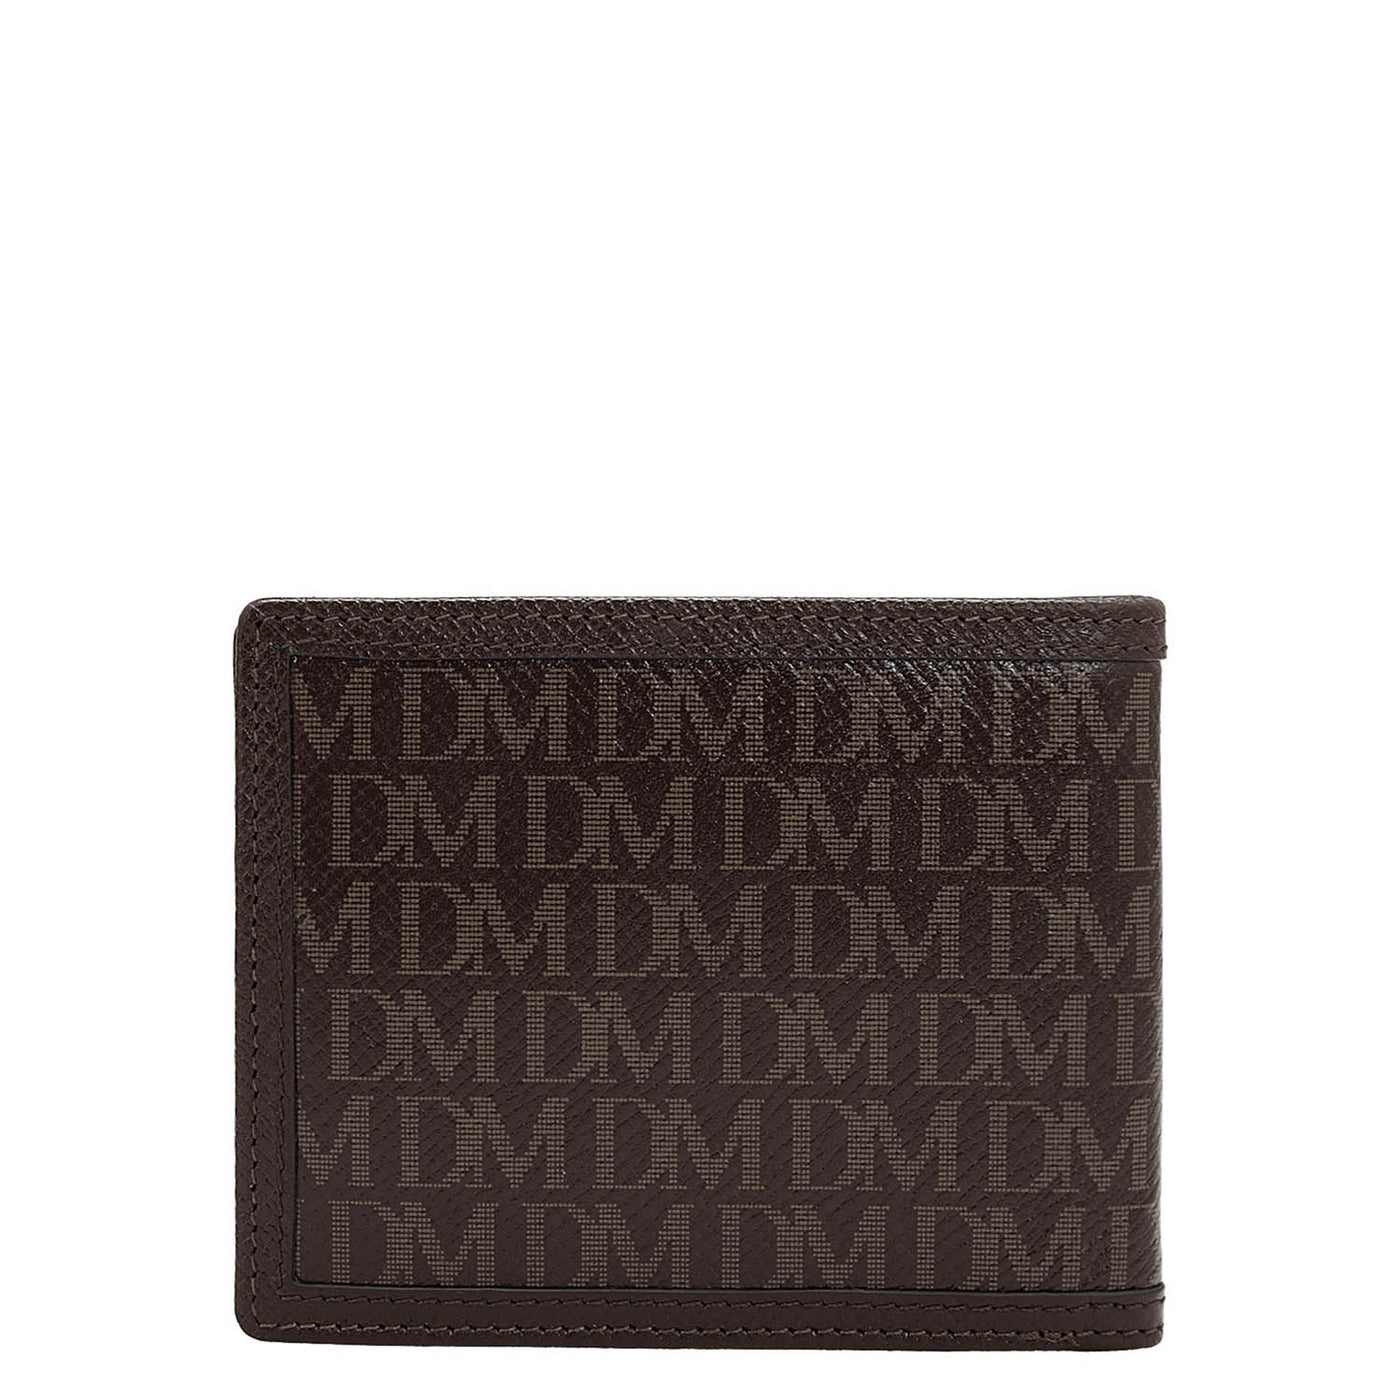 Monogram Franzy Leather Mens Wallet - Chocolate